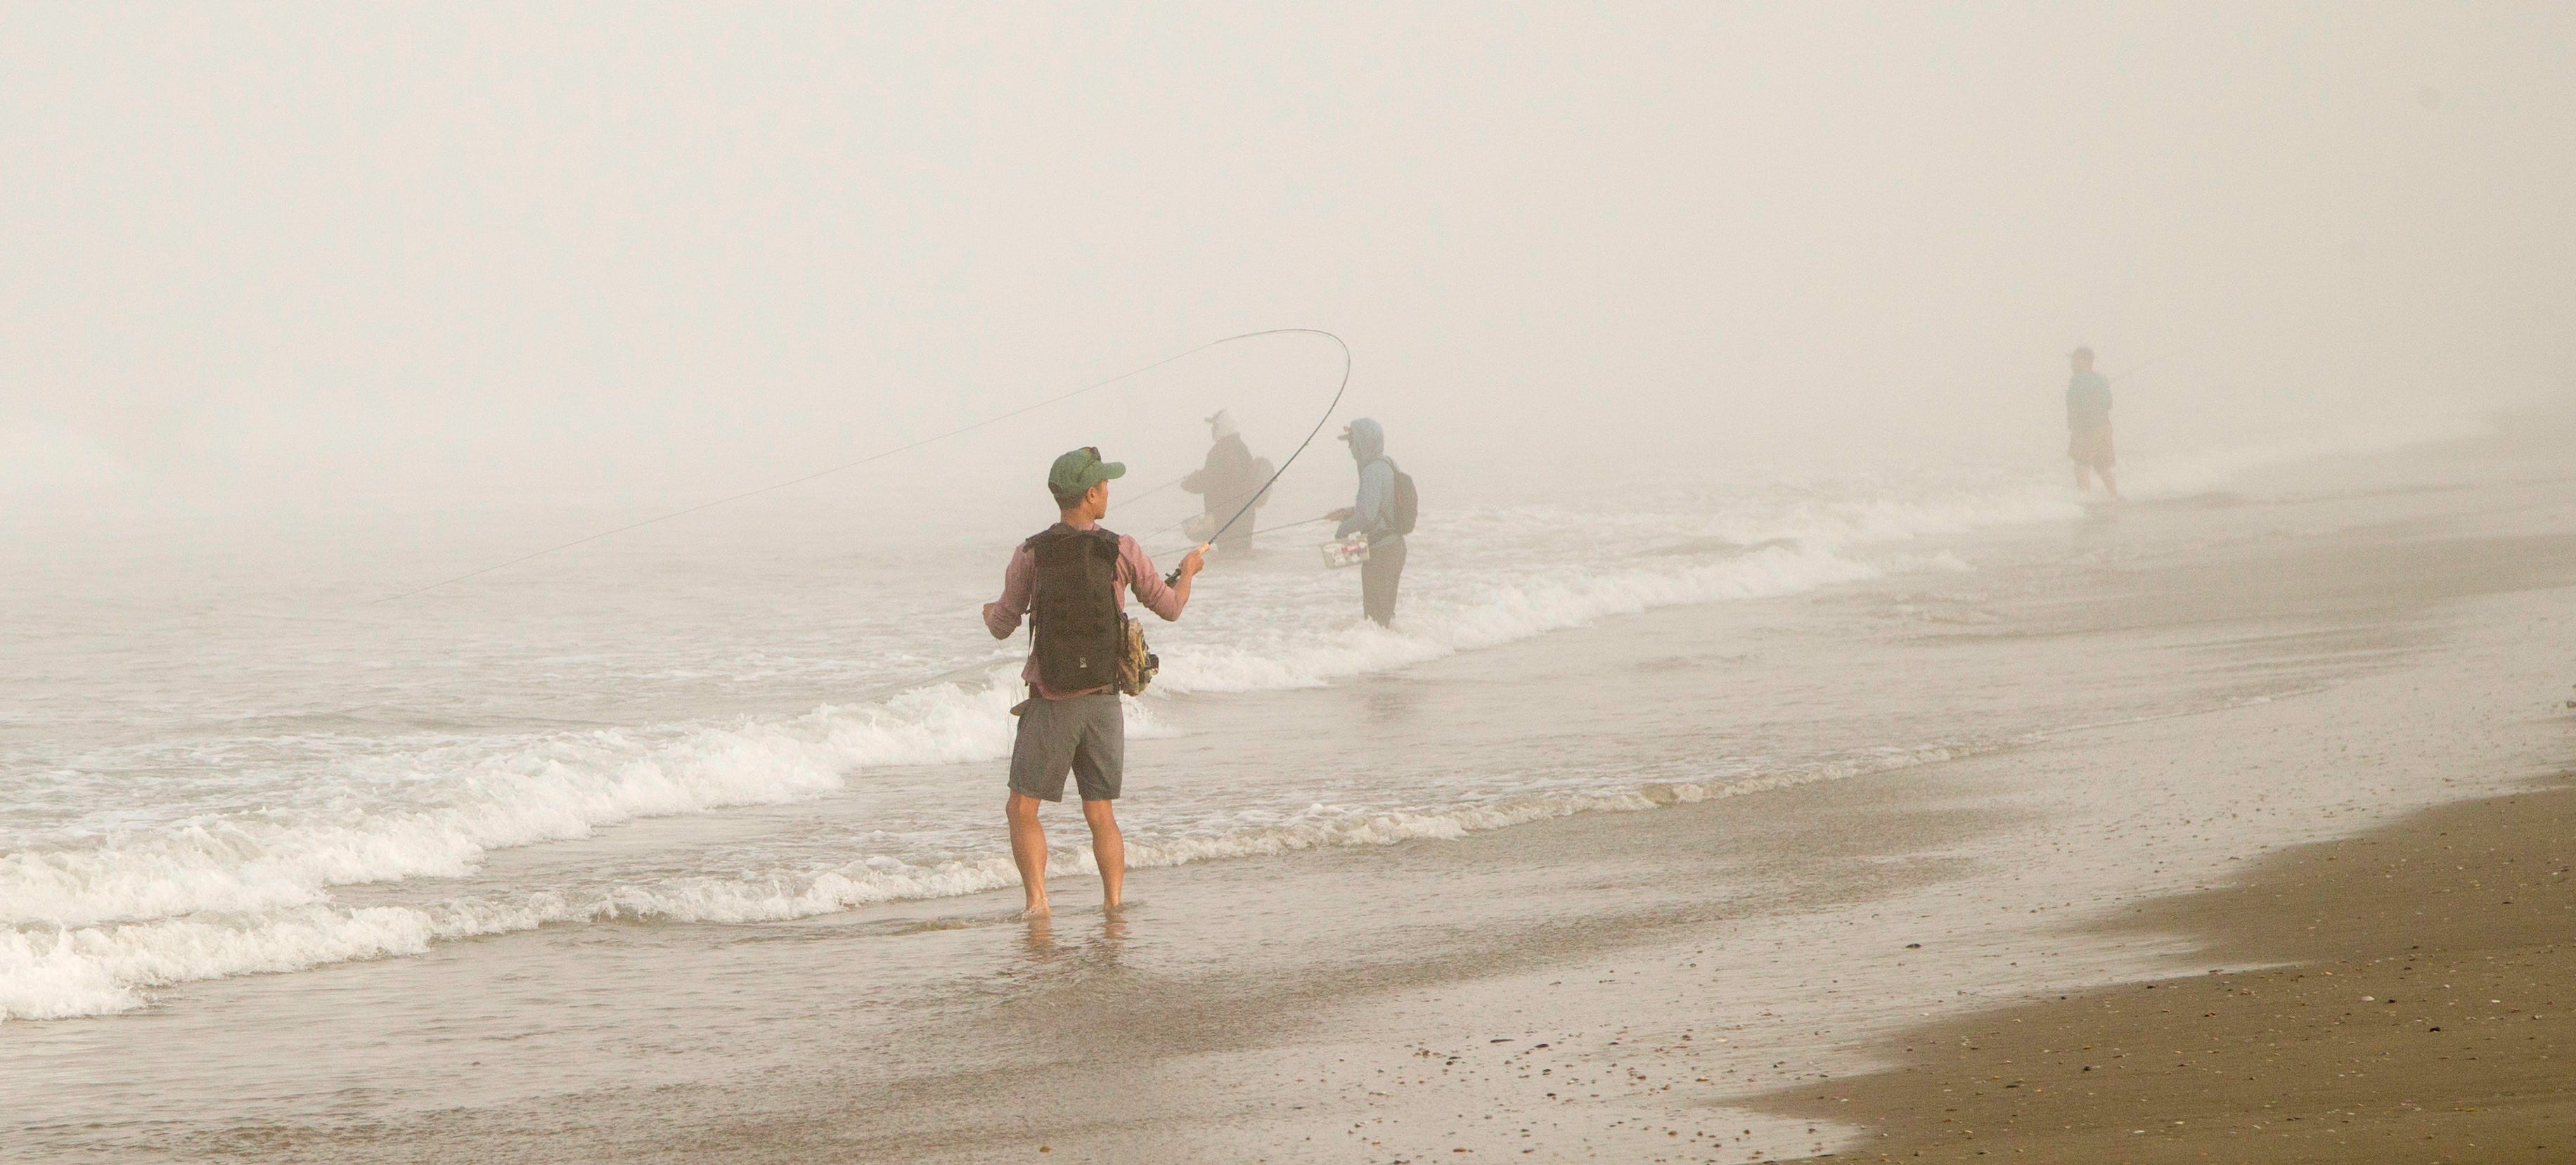 Hey Ken! 'Just beach' includes cool fly fishing